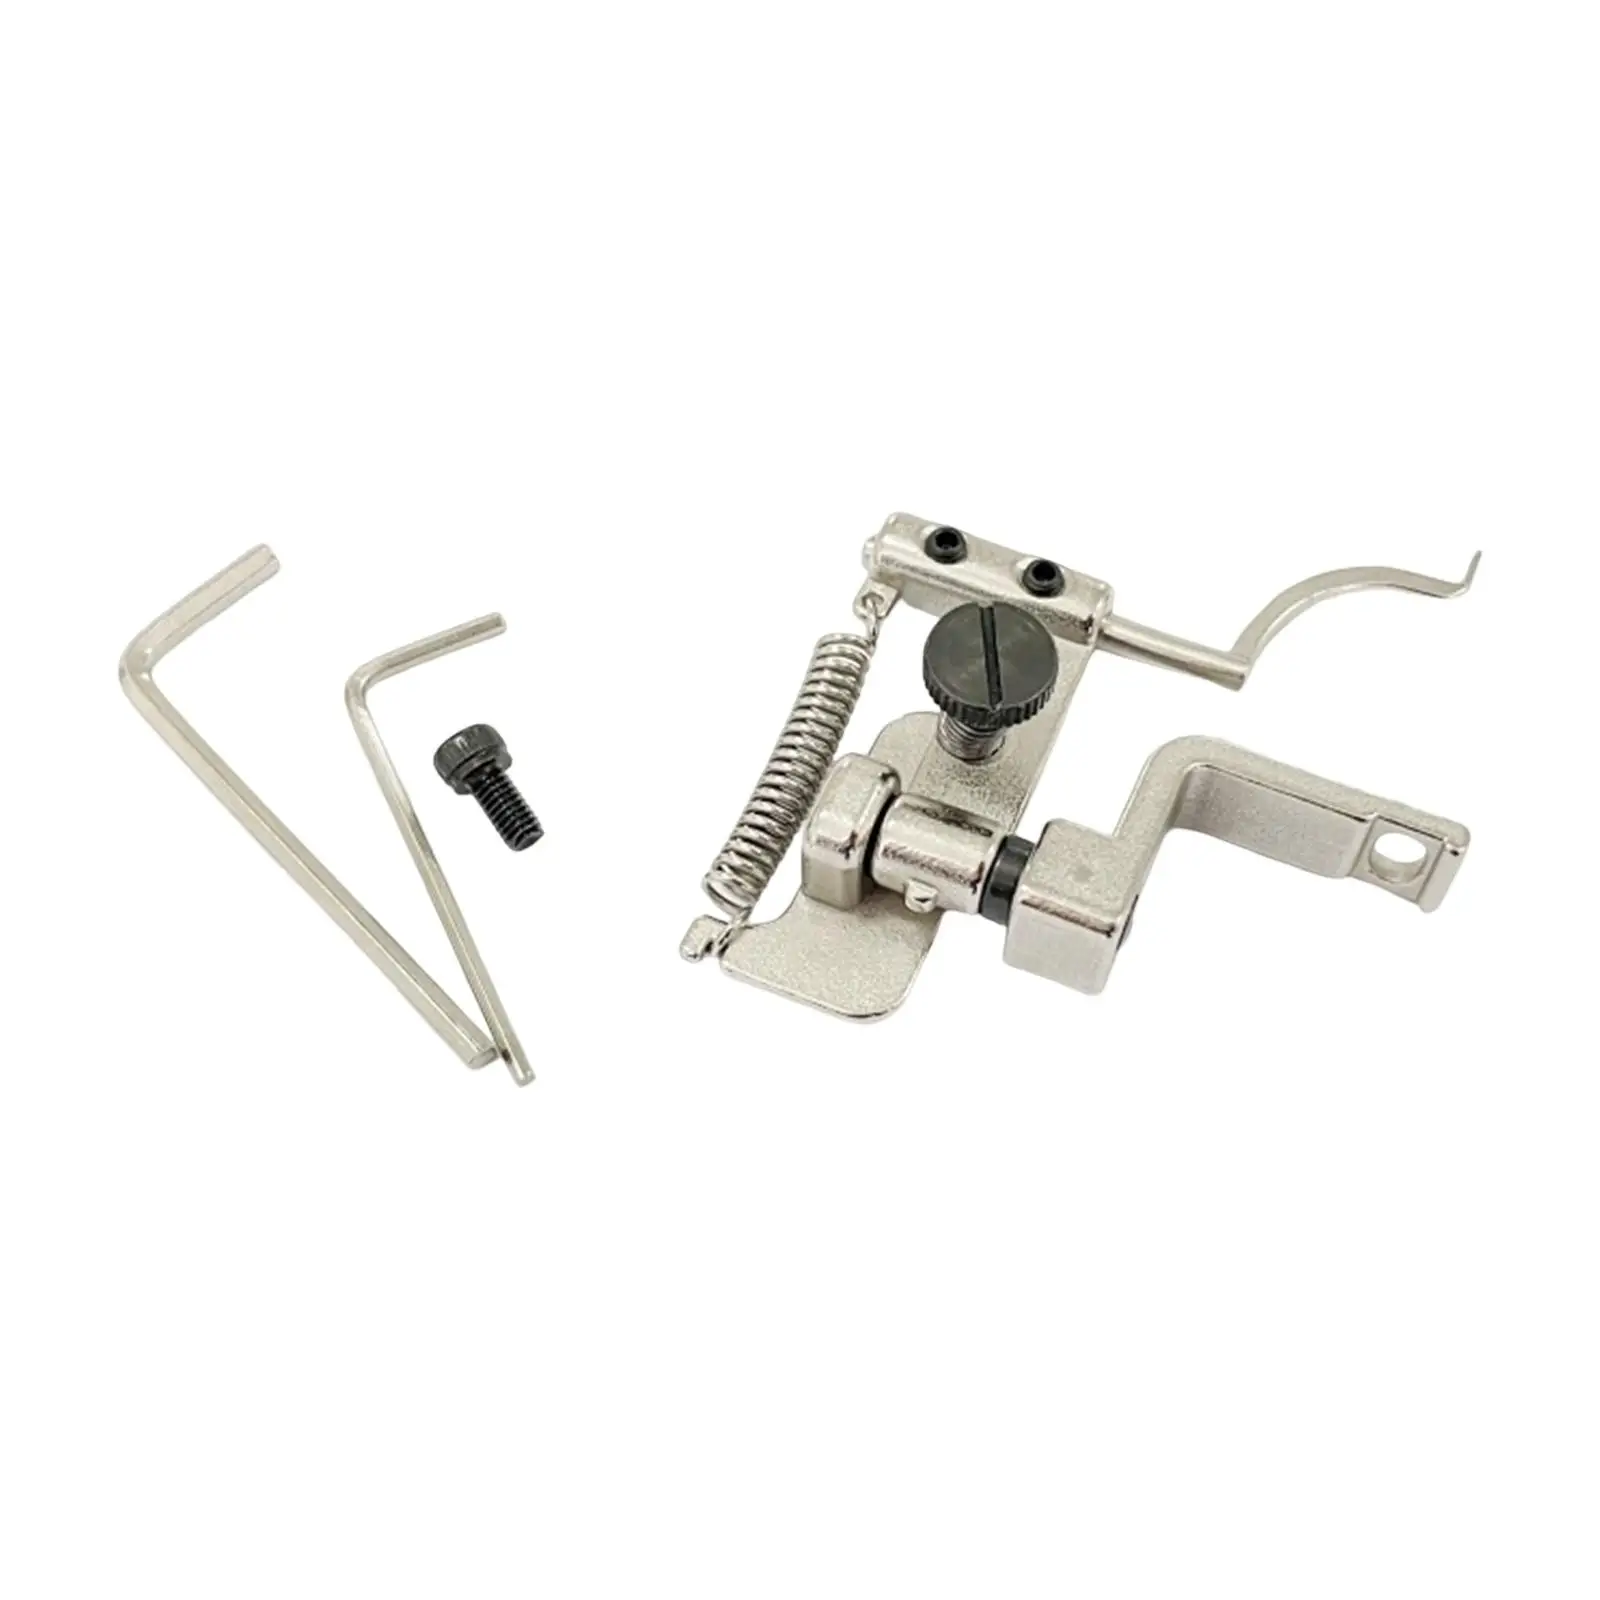 Suspended Edge Guide Locator Edge Guide with Mounting Screws Presser for 891